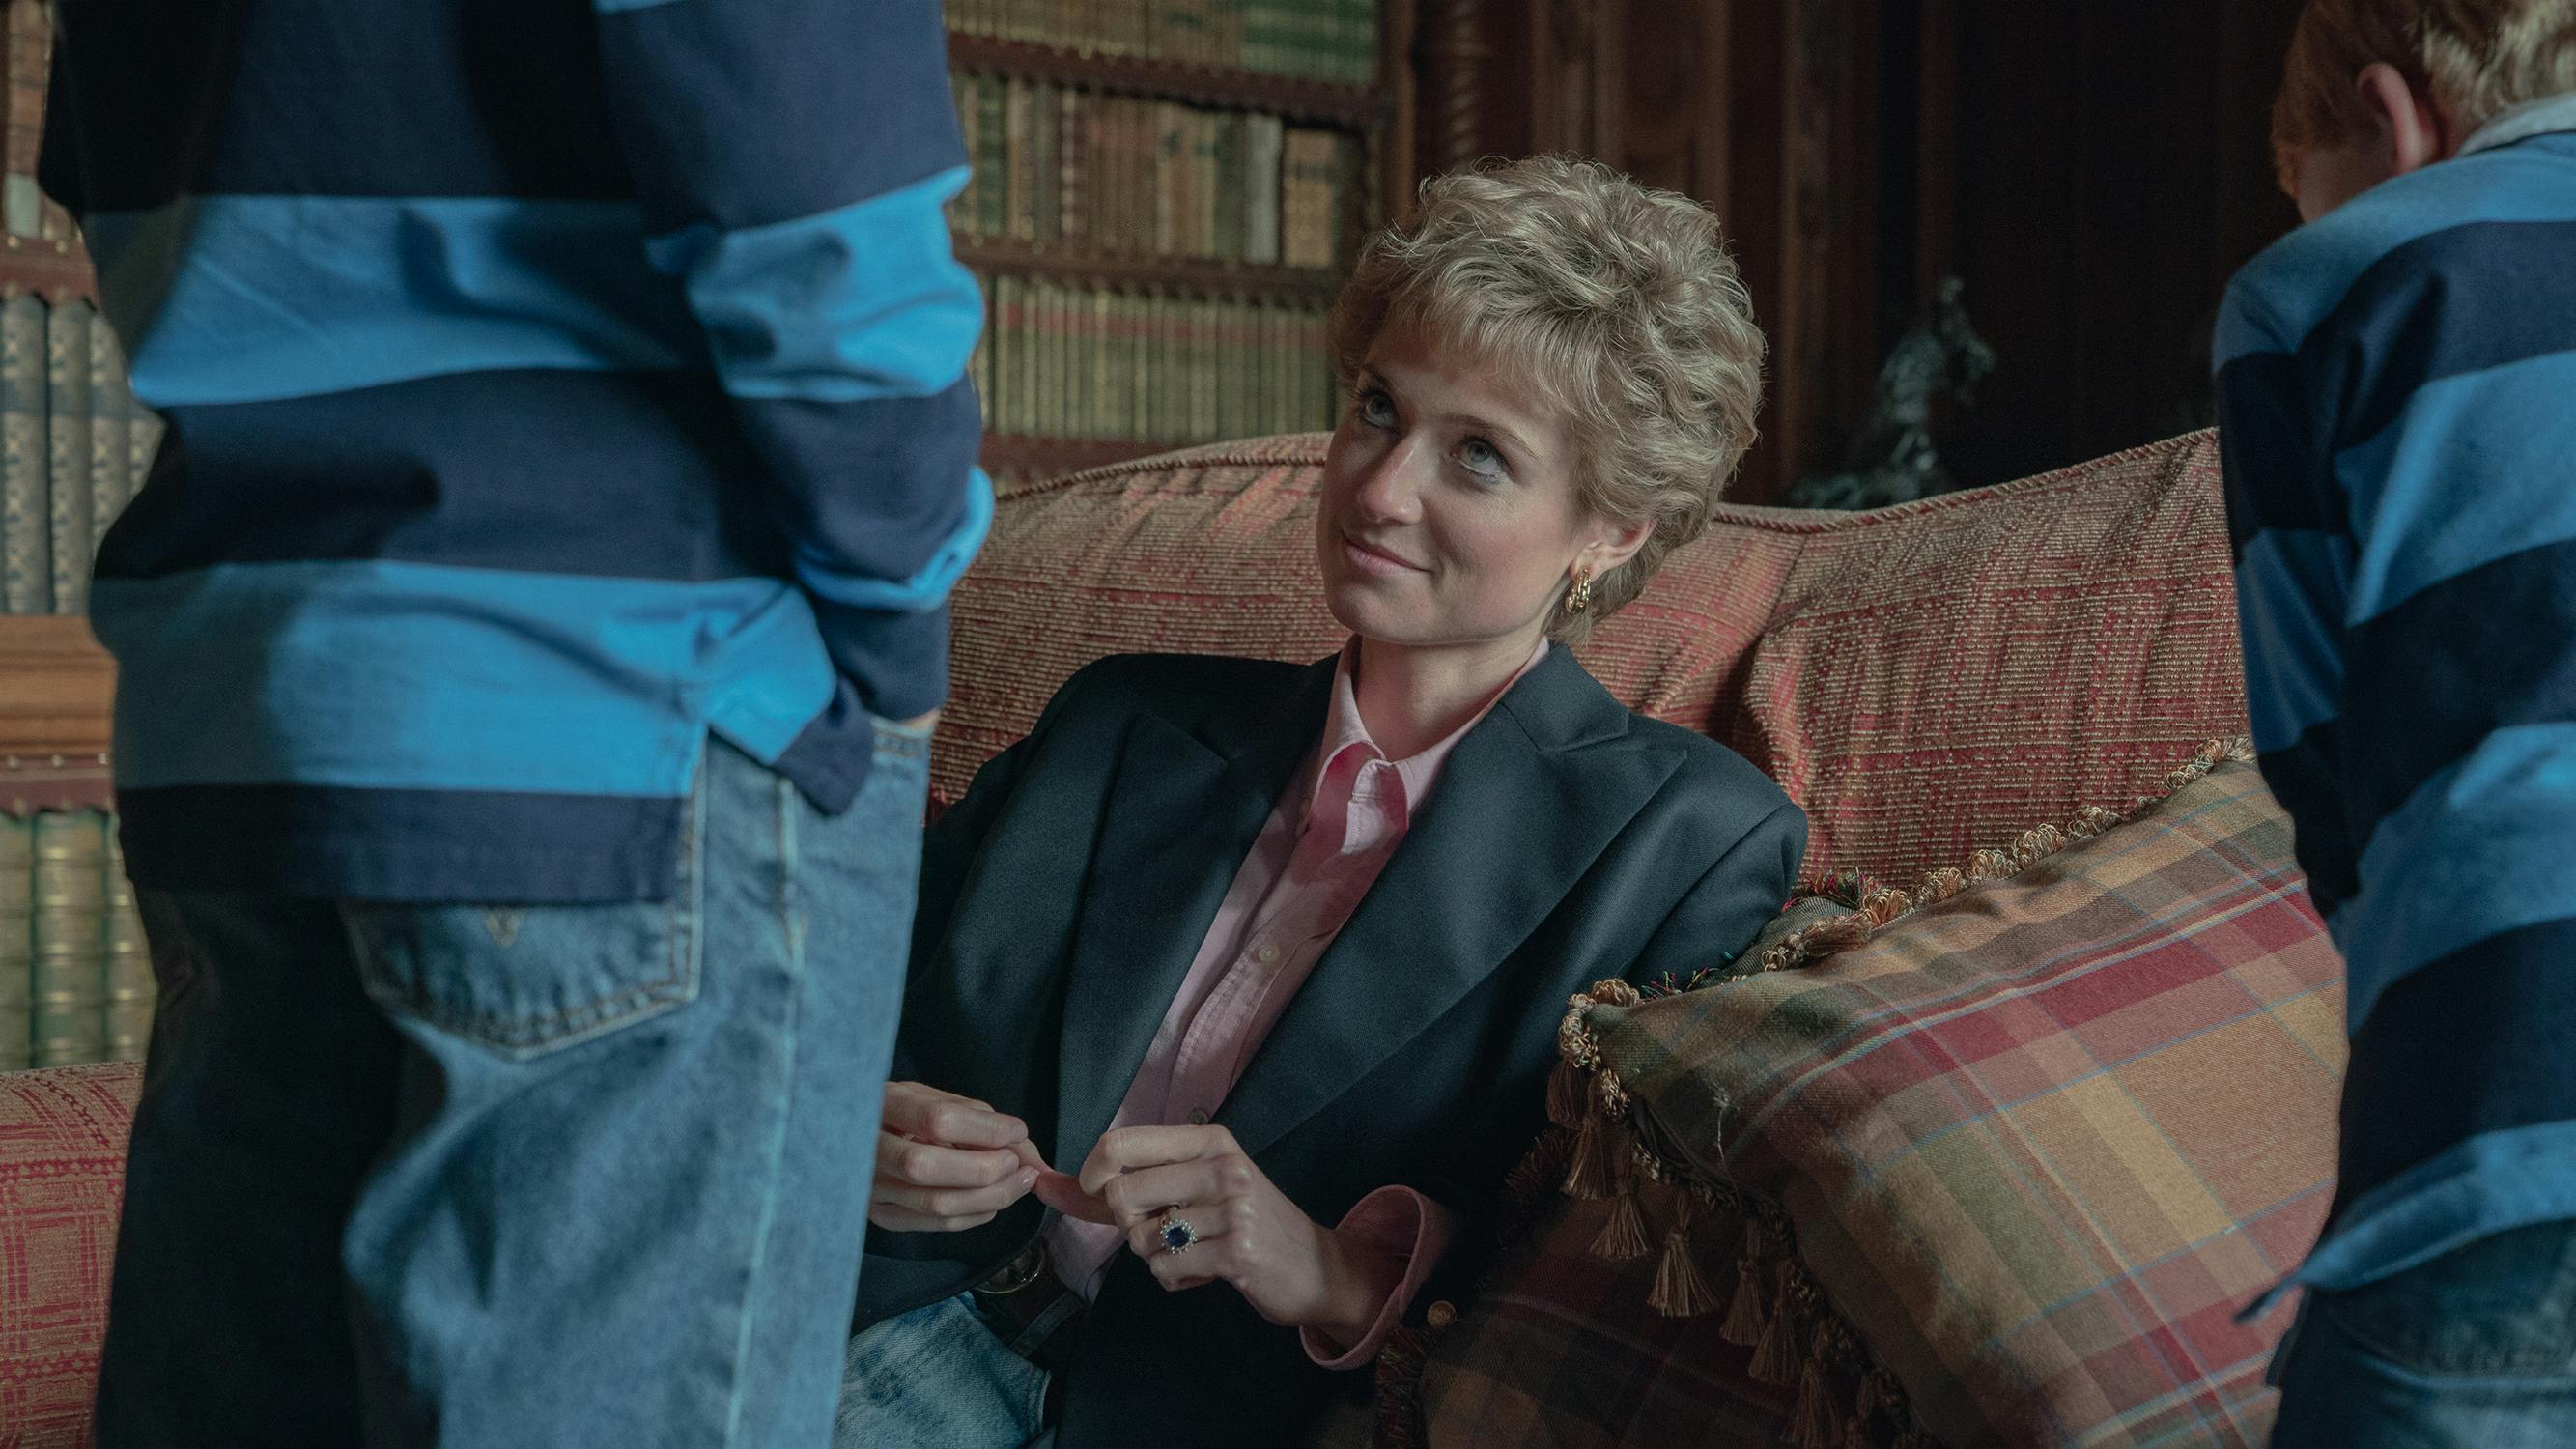 Princess Diana (Elizabeth Debicki) sits on a patterned couch with her boys facing her, their backs to the camera.